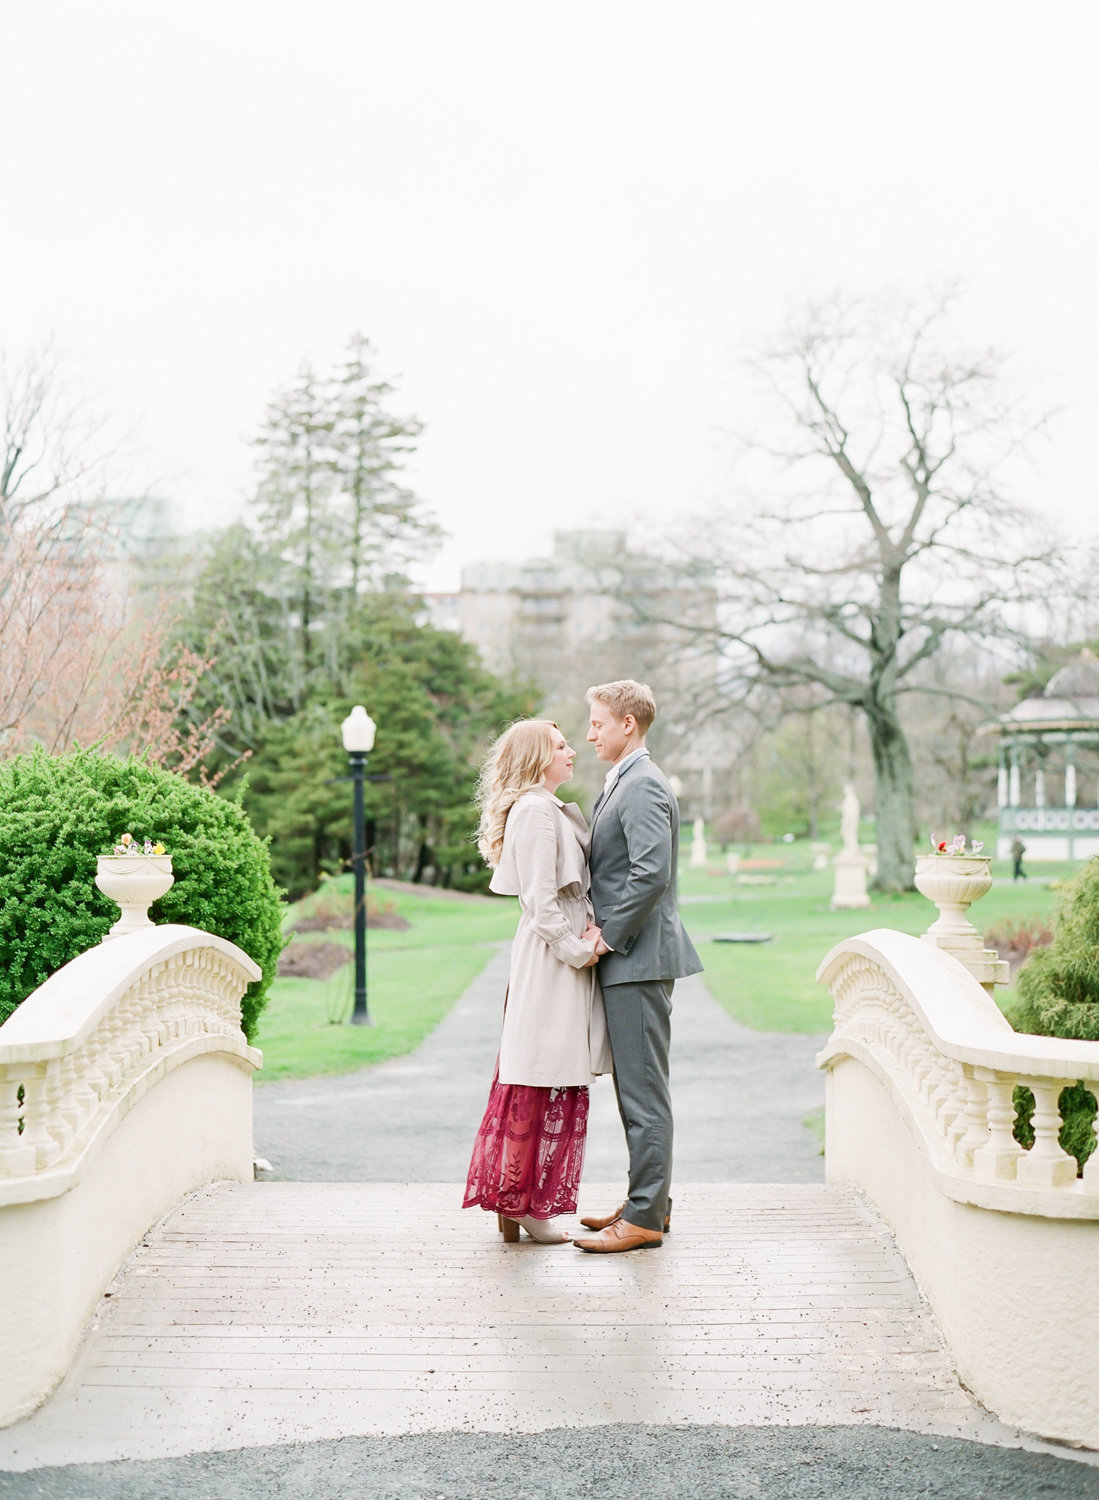 Jacqueline Anne Photography - Amanda and Brent-38